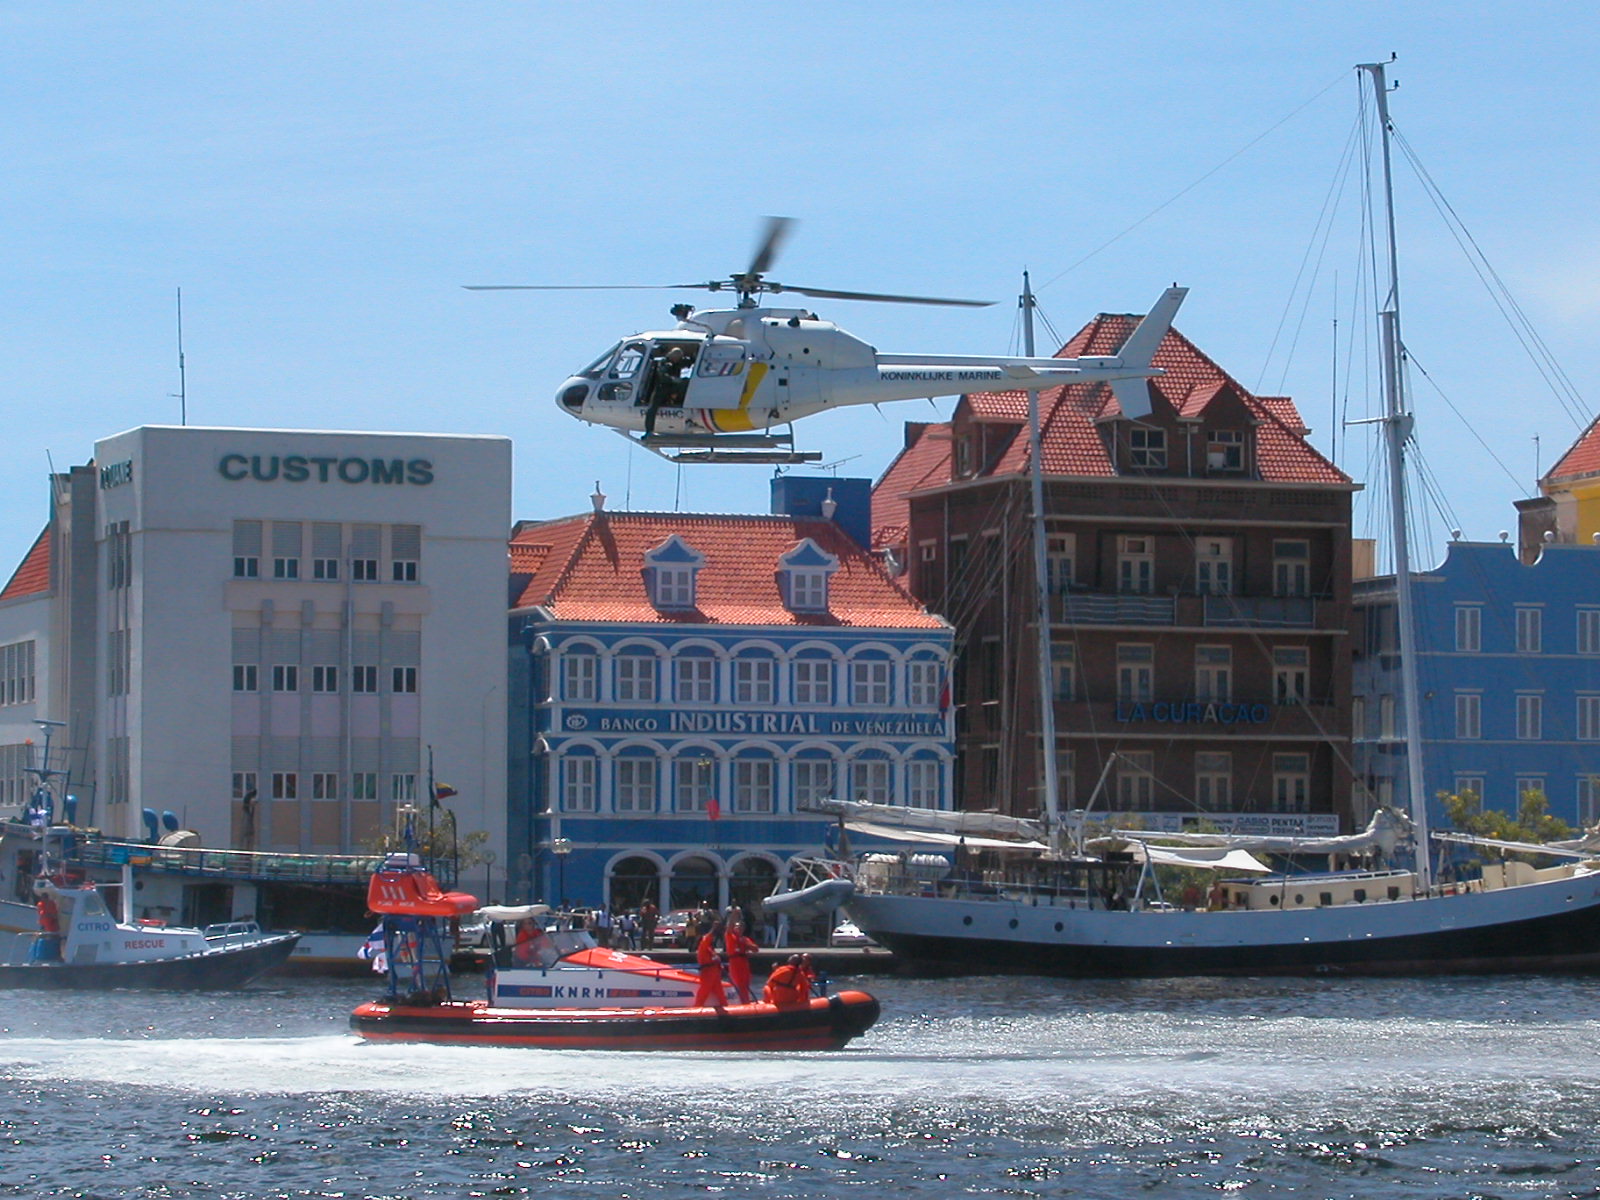 vehicles air water chopper helicopter rescue coastguard knrm jacco curacao willemstad buildings